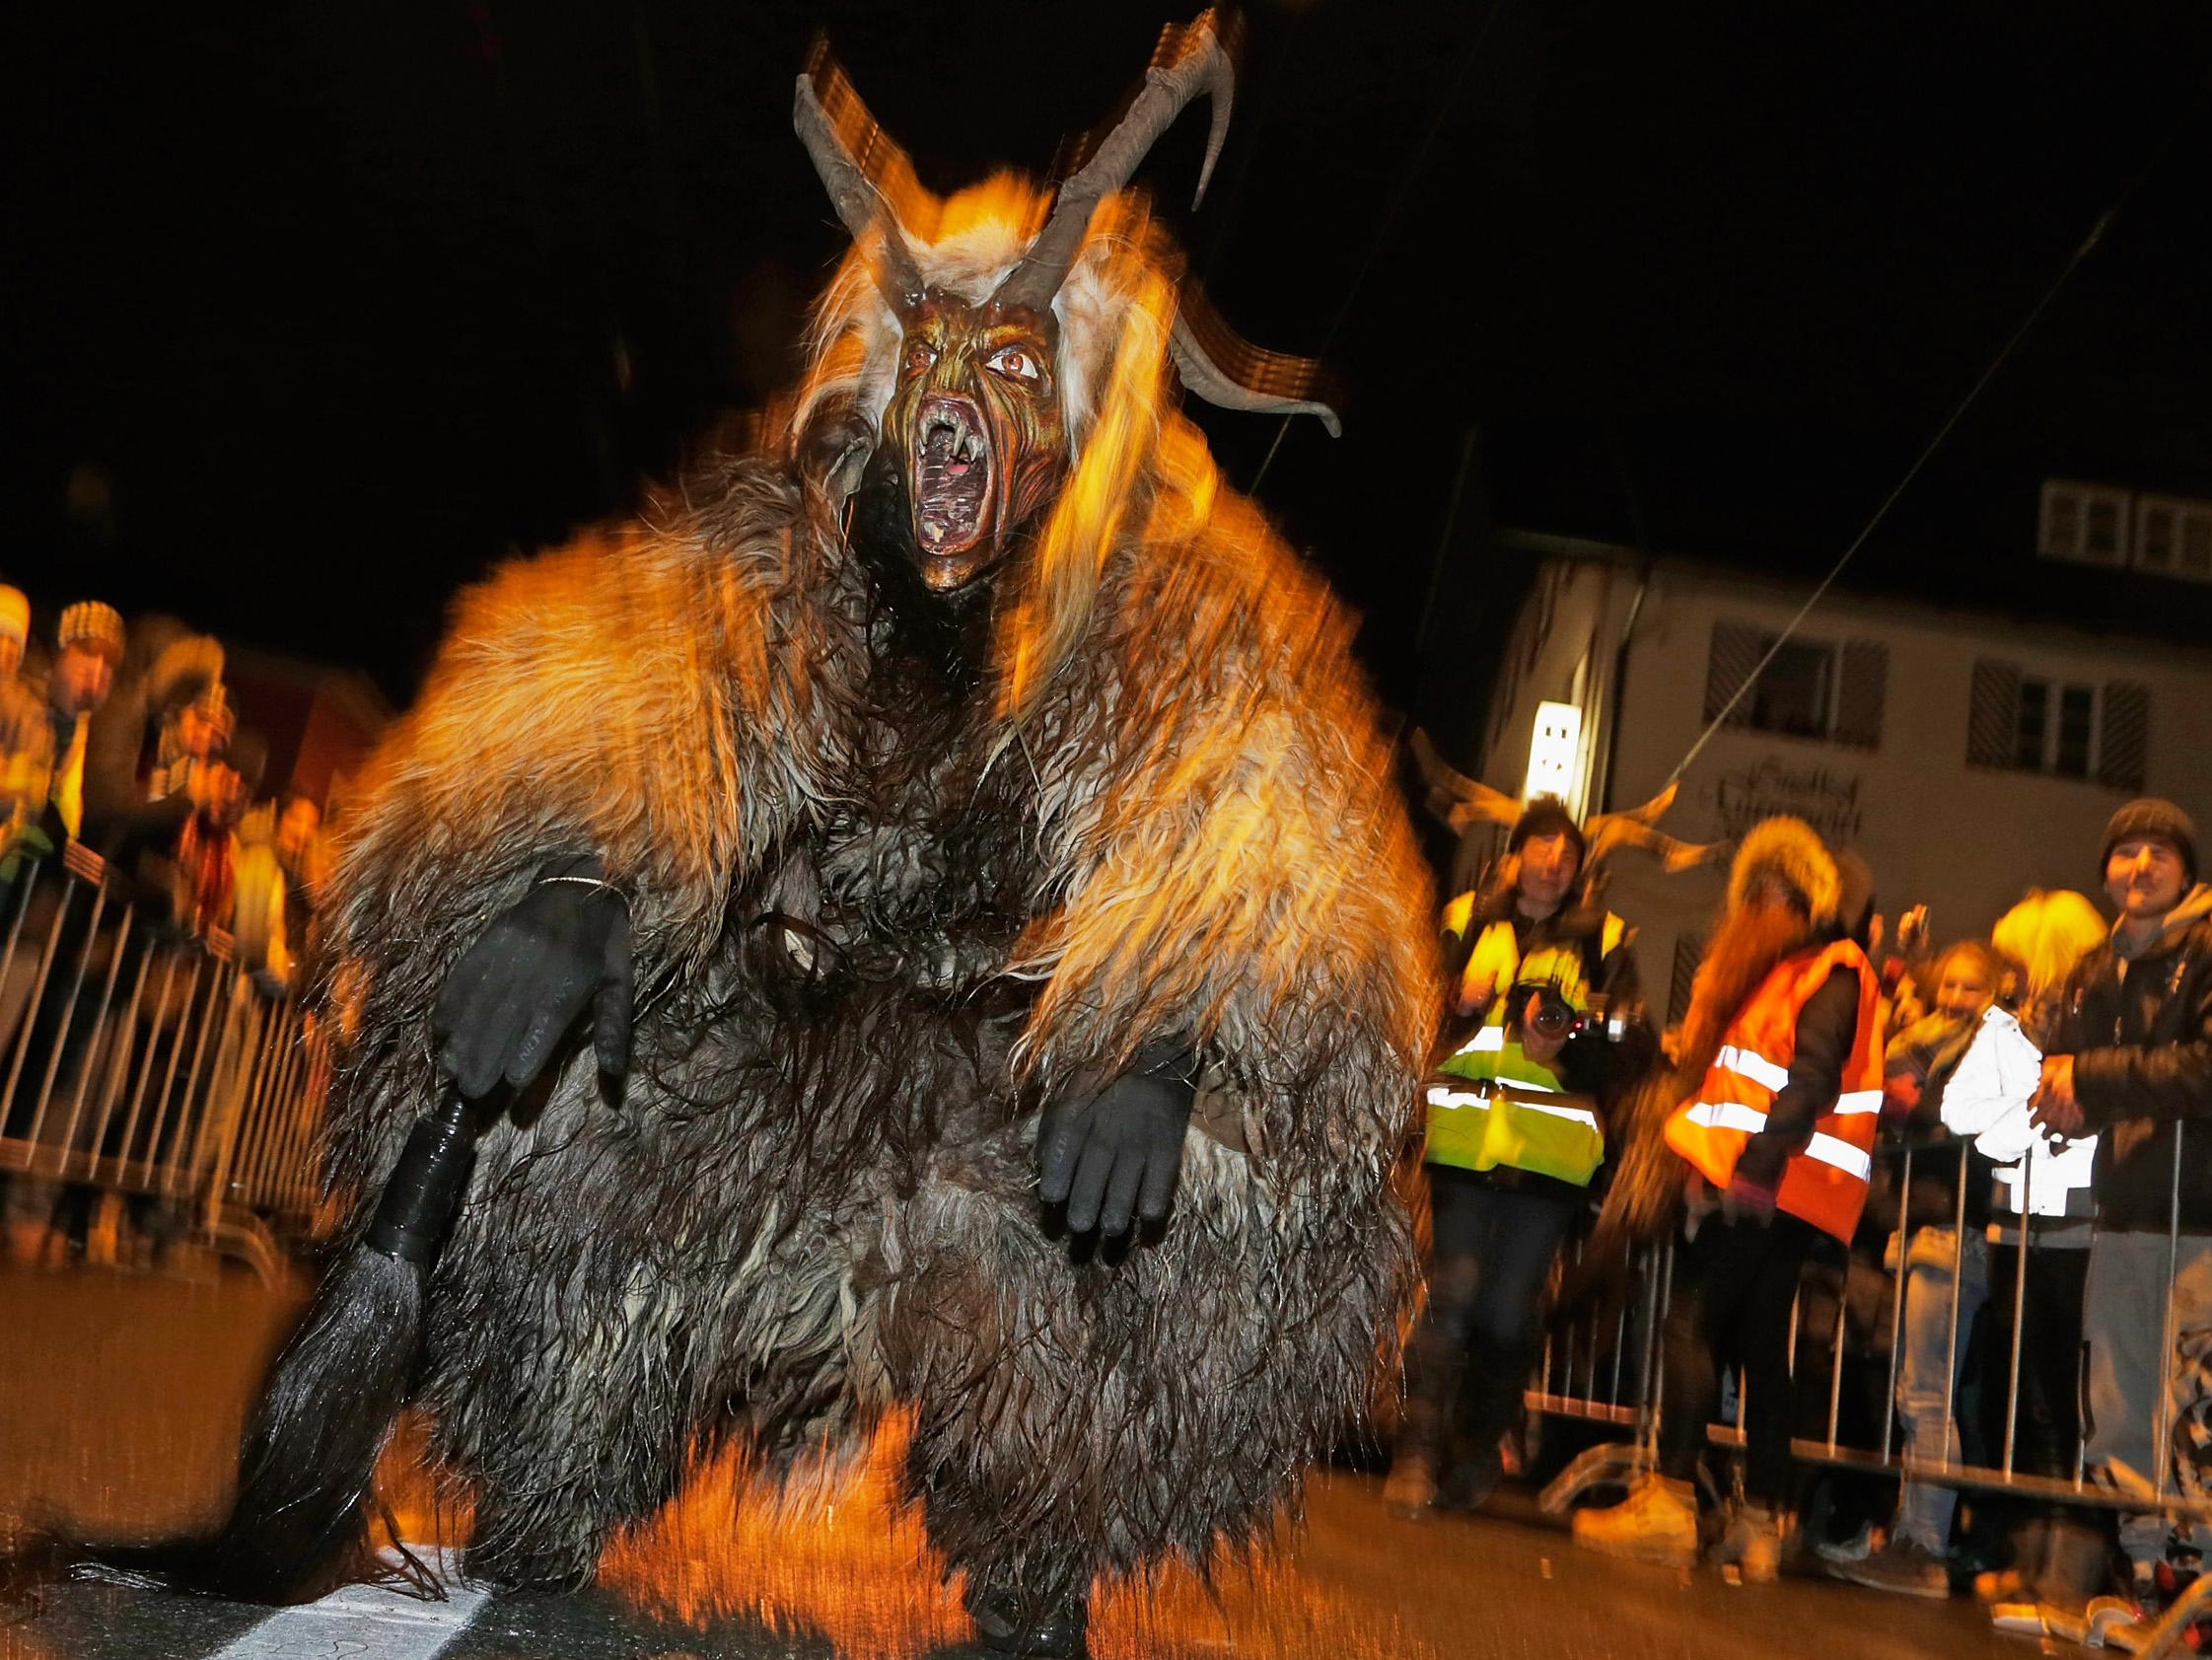 Krampus is a traditional demon figure in central Europe who scares and punishes children who have misbehaved